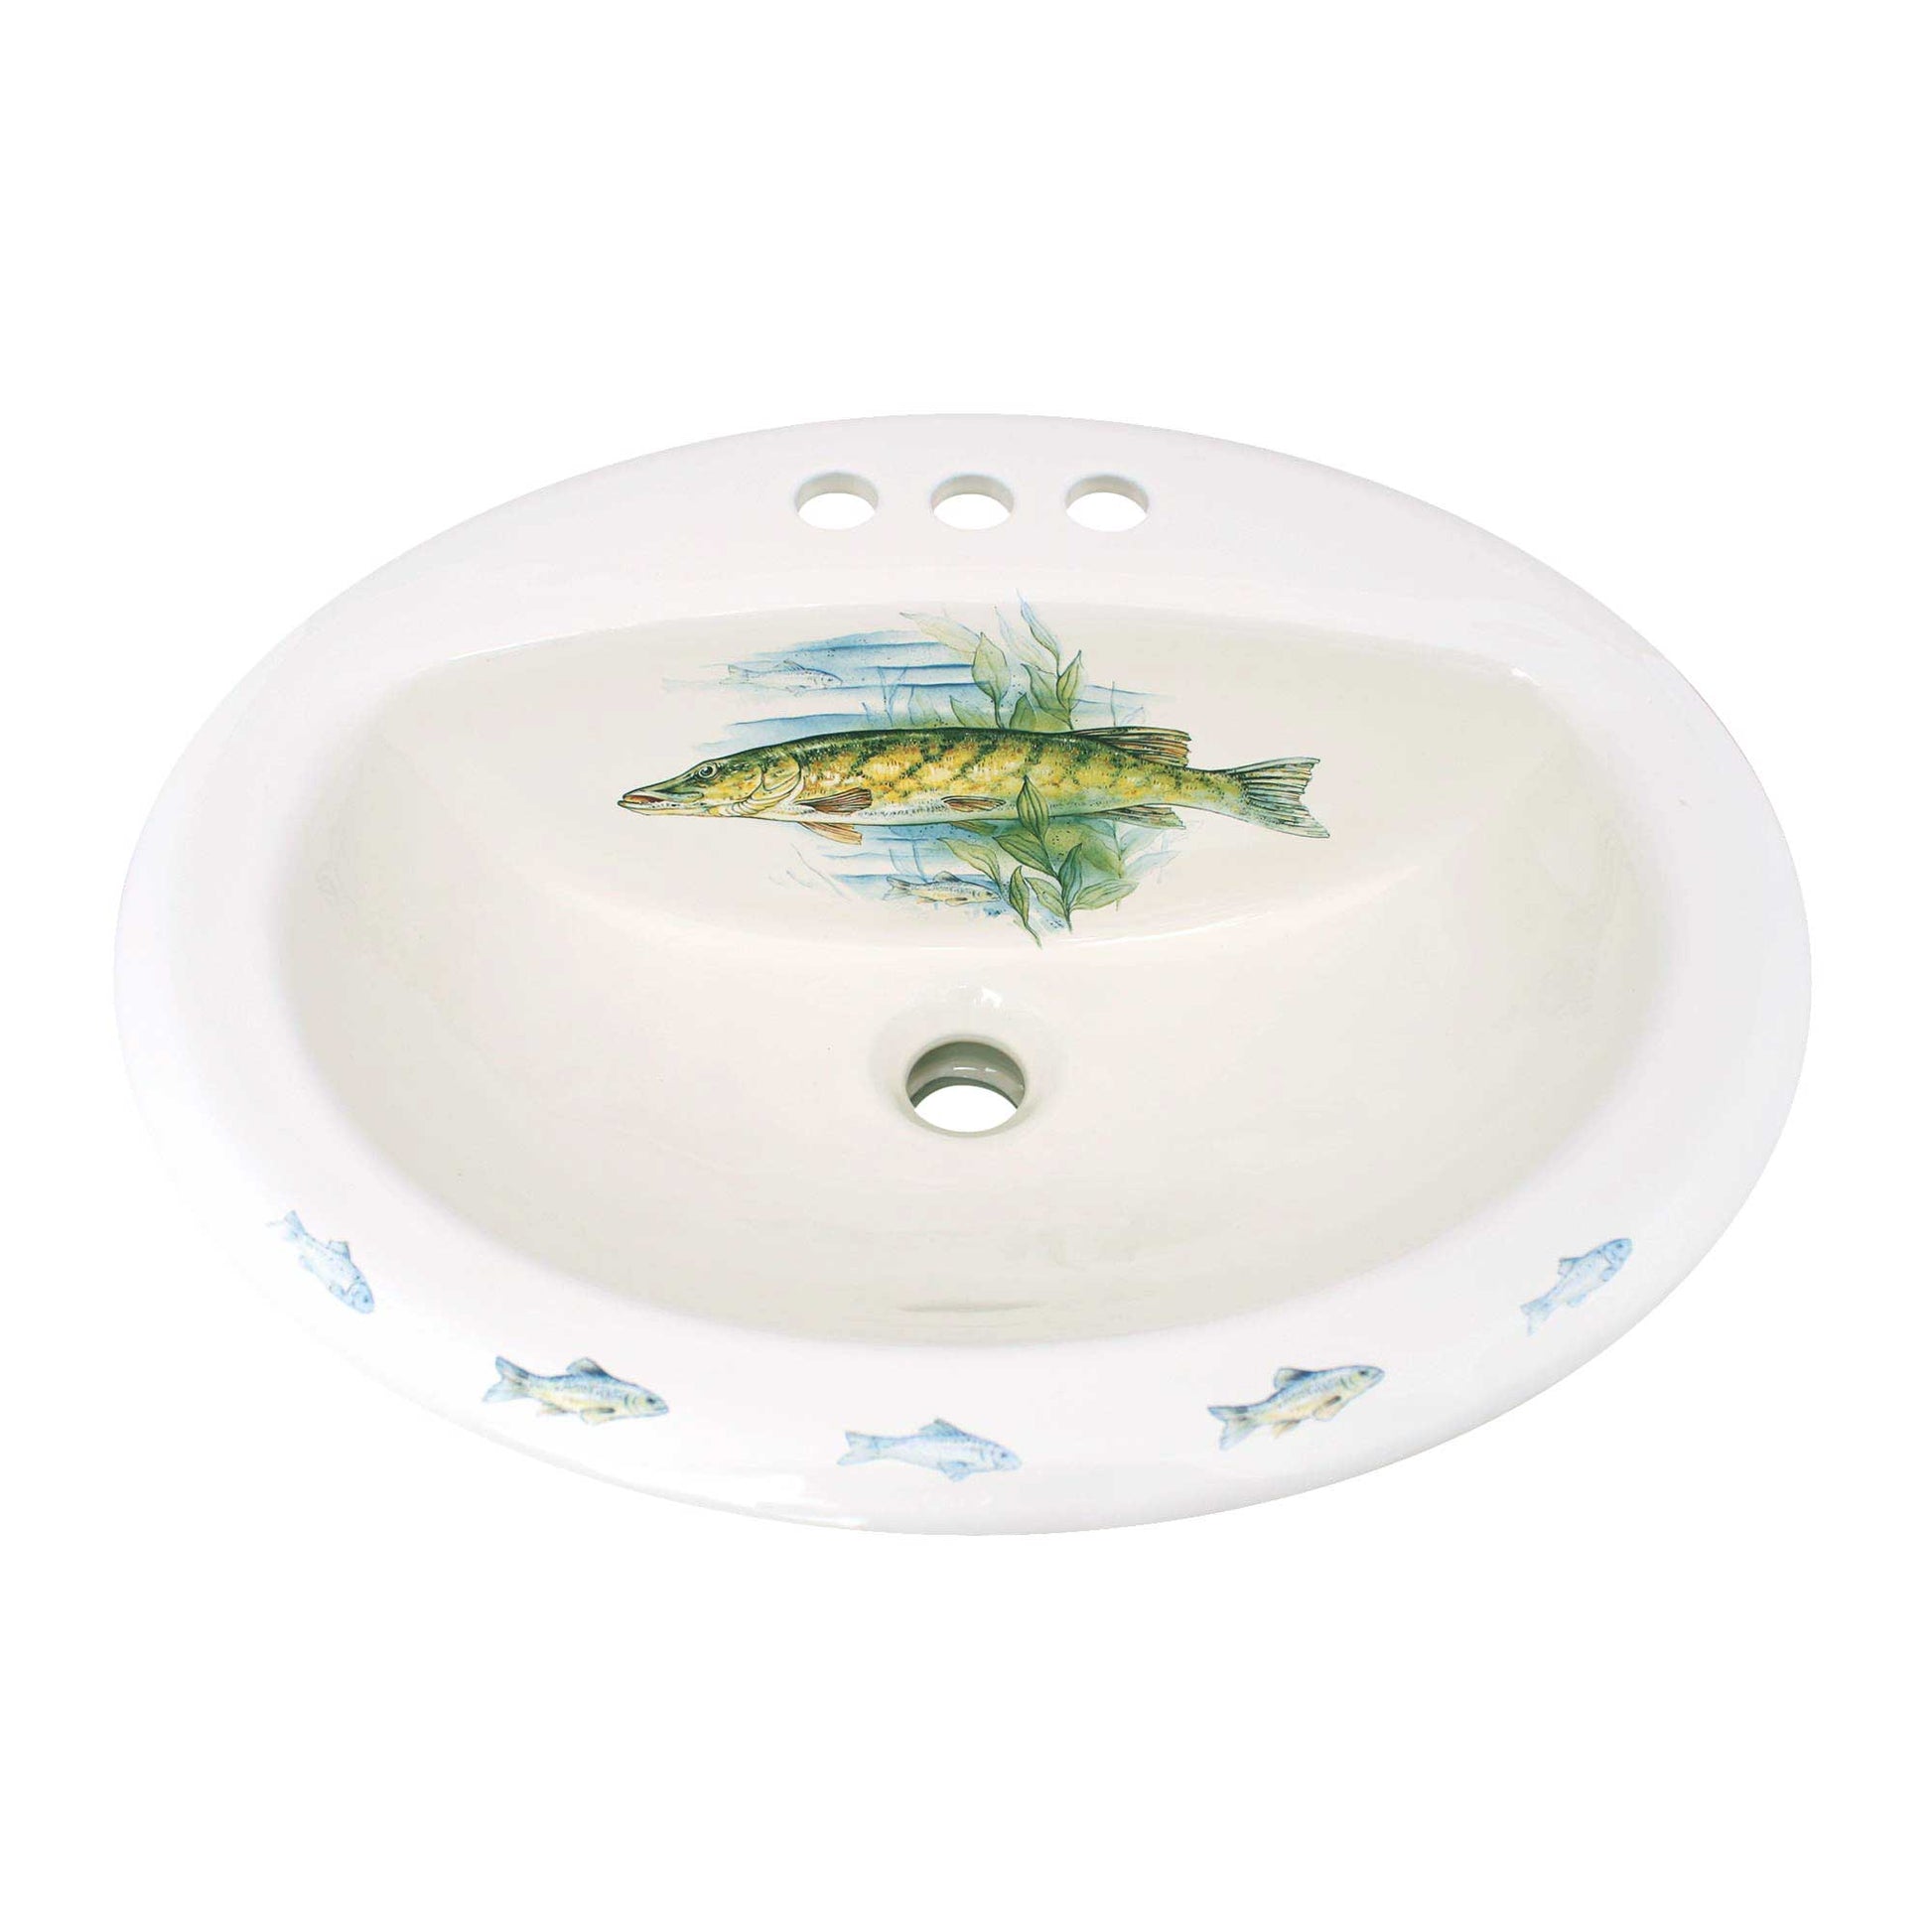 hand painted drop-in bathroom sink with blue musky fish and seaweed design